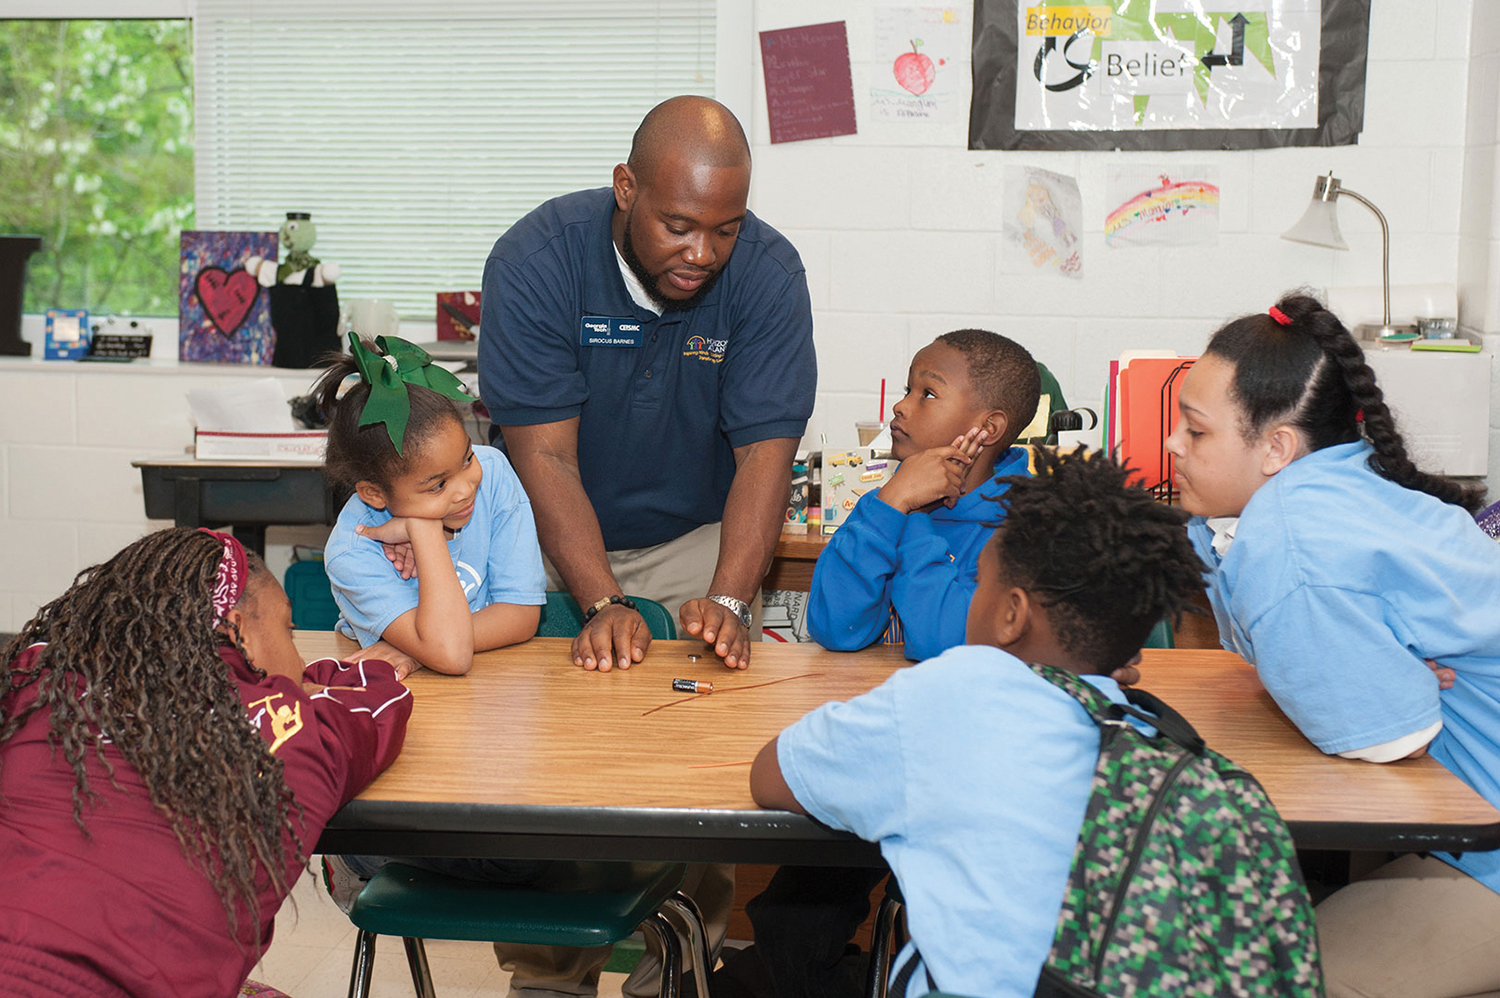 Sirocus Barnes gives instruction in an extracurricular science and technology class at Drew Charter School.